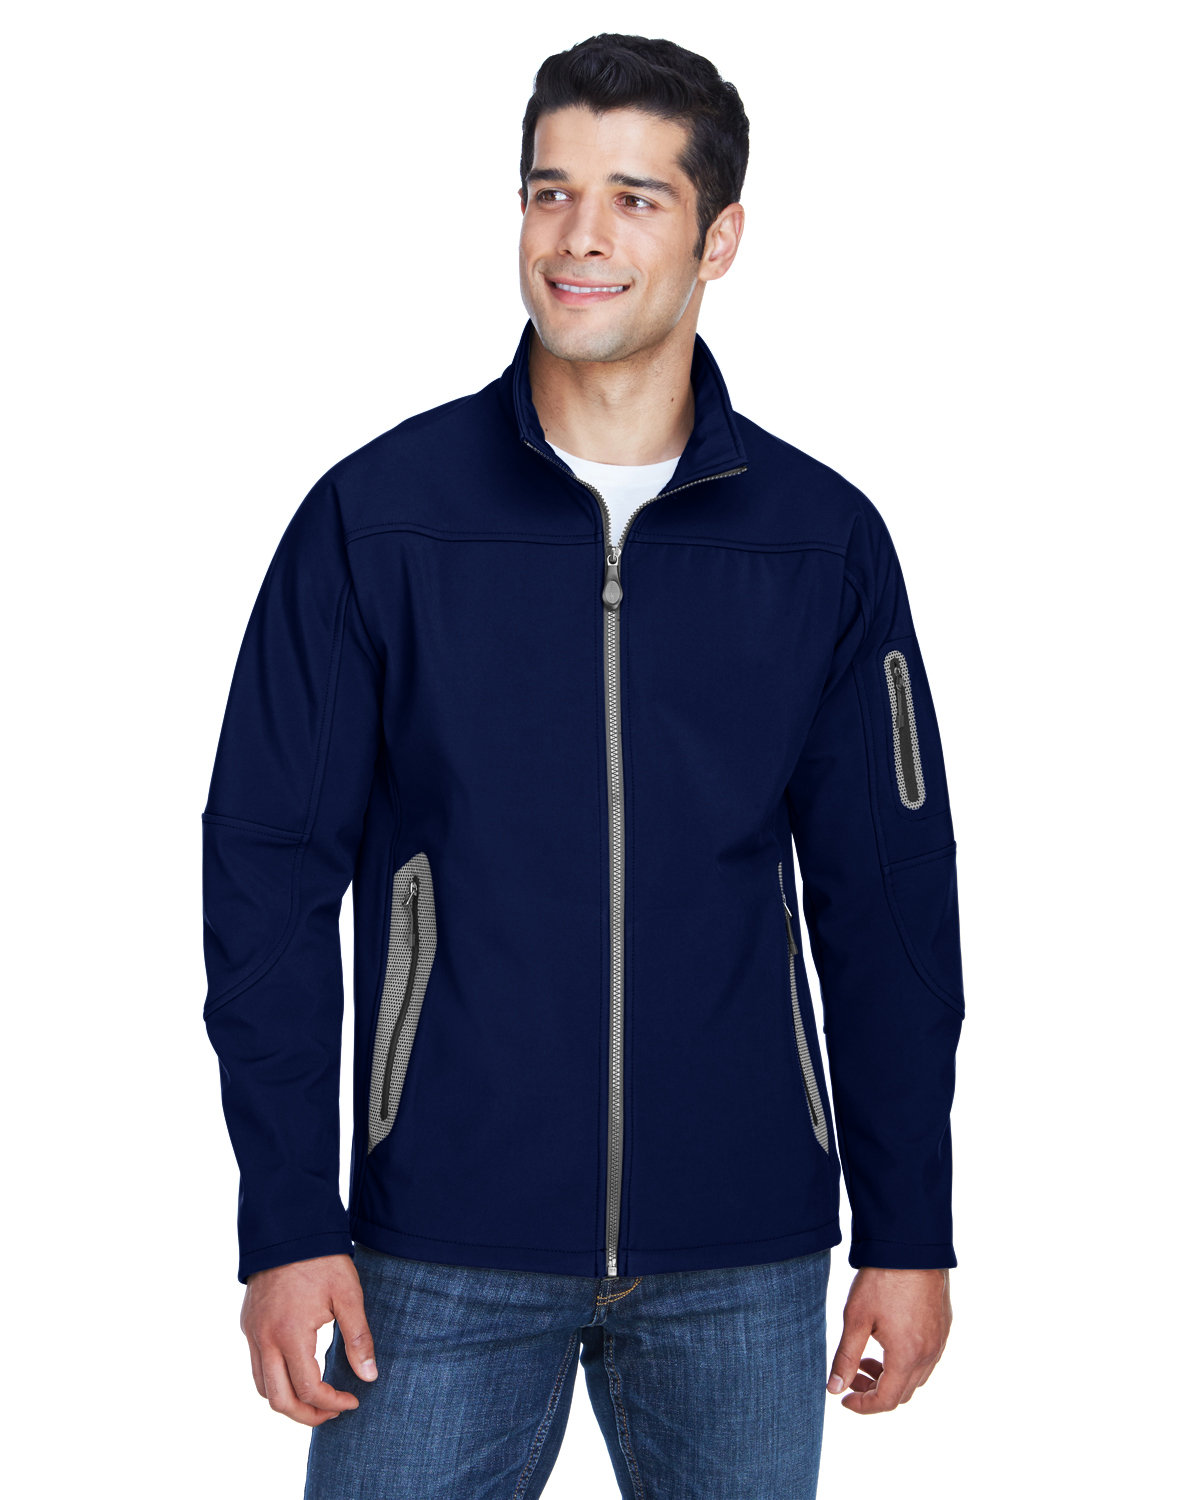 North End Men's Three-Layer Fleece Bonded Soft Shell Technical Jacket CLASSIC NAVY 